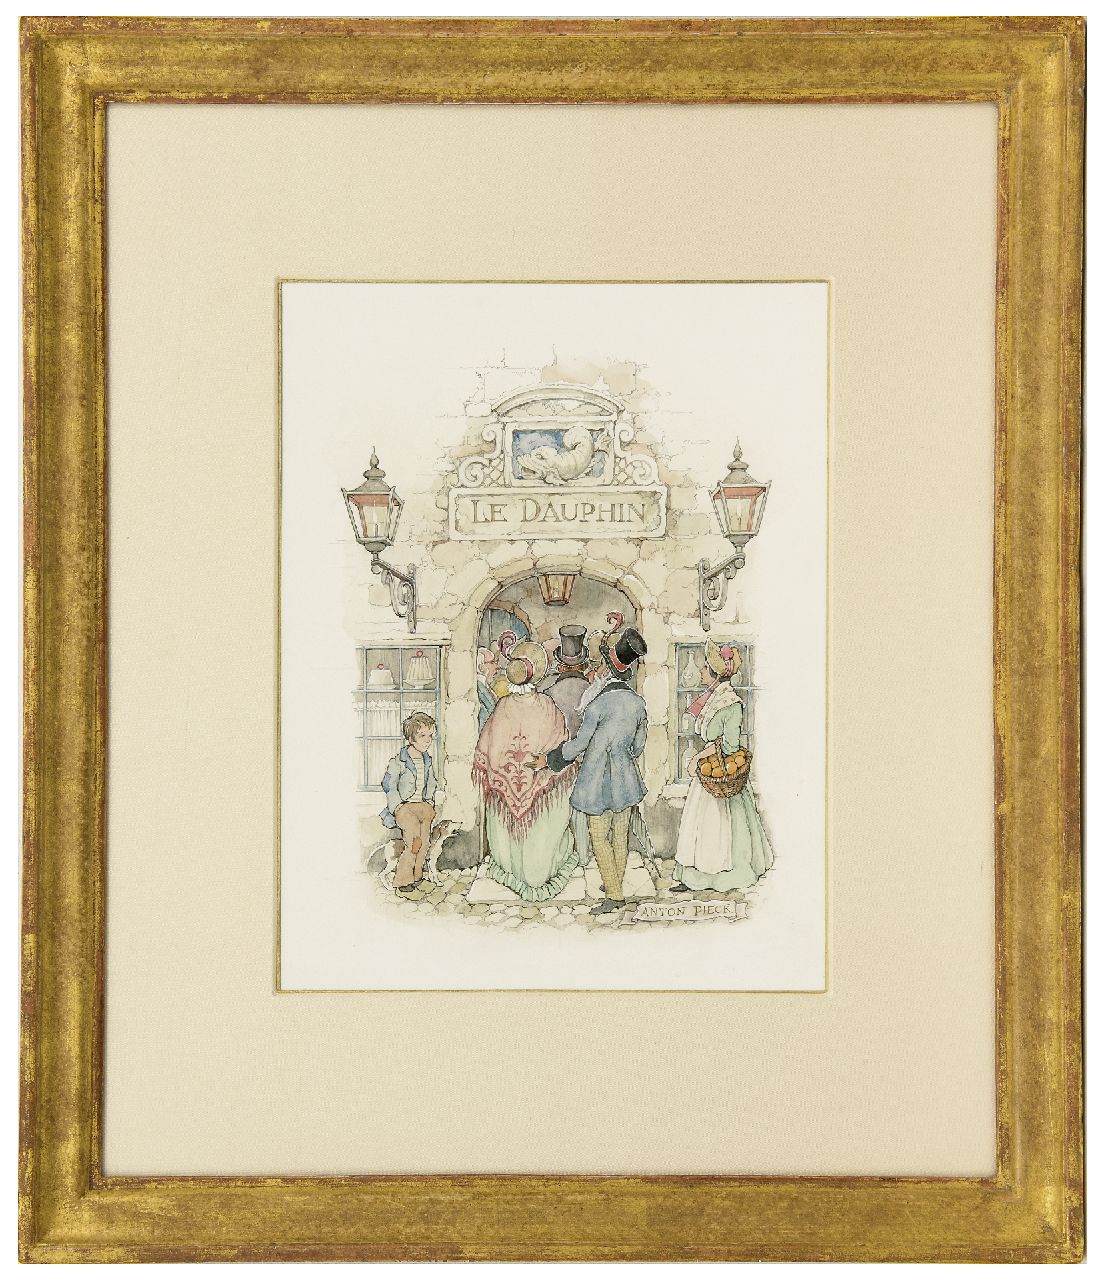 Pieck A.F.  | 'Anton' Franciscus Pieck, Company entering 'Le Dauphin', pencil and watercolour on paper 29.7 x 23.0 cm, signed l.r.